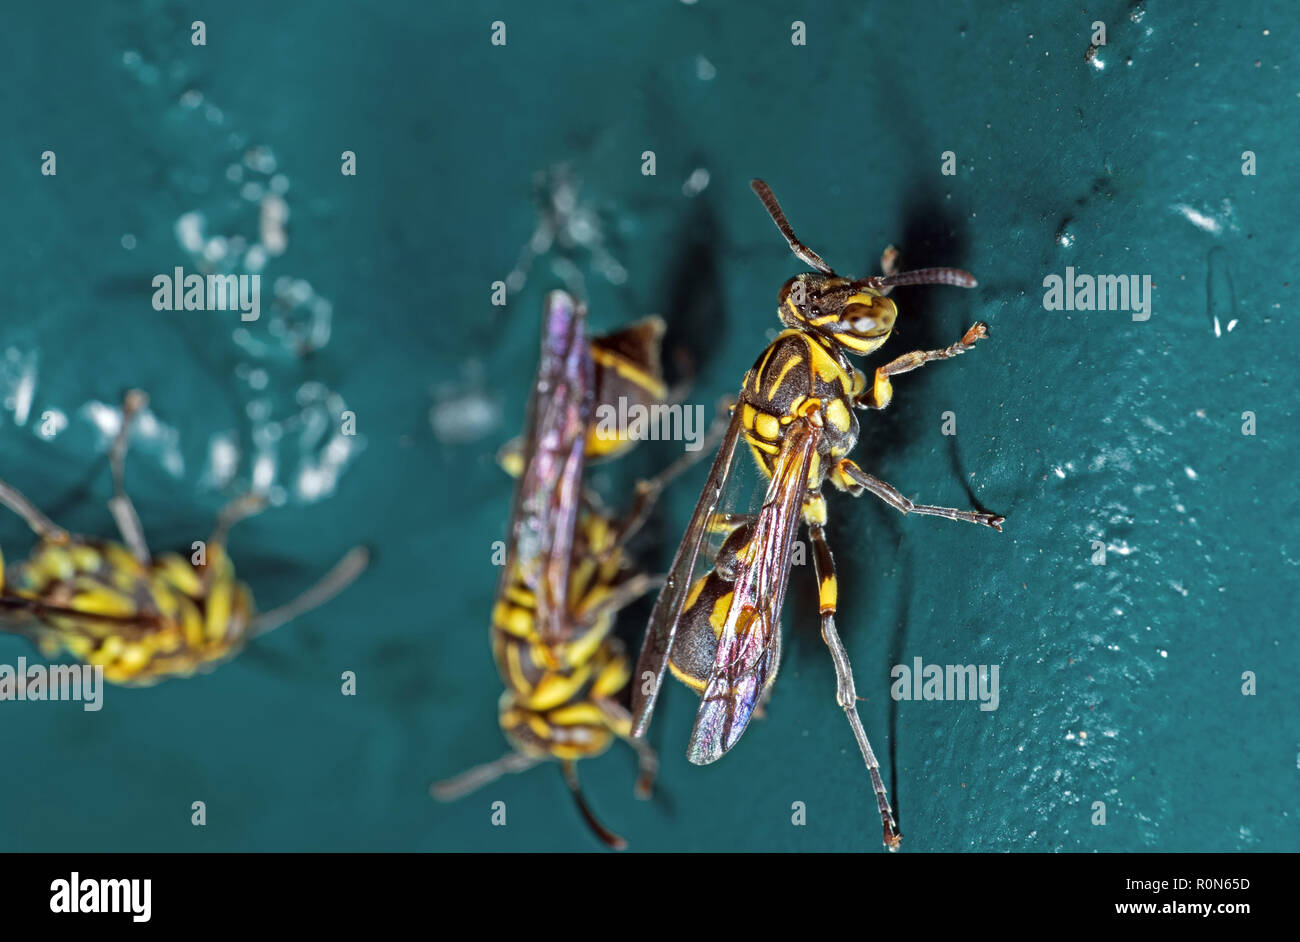 Macro Photography of Wasp on Blue Green Metal Material Stock Photo